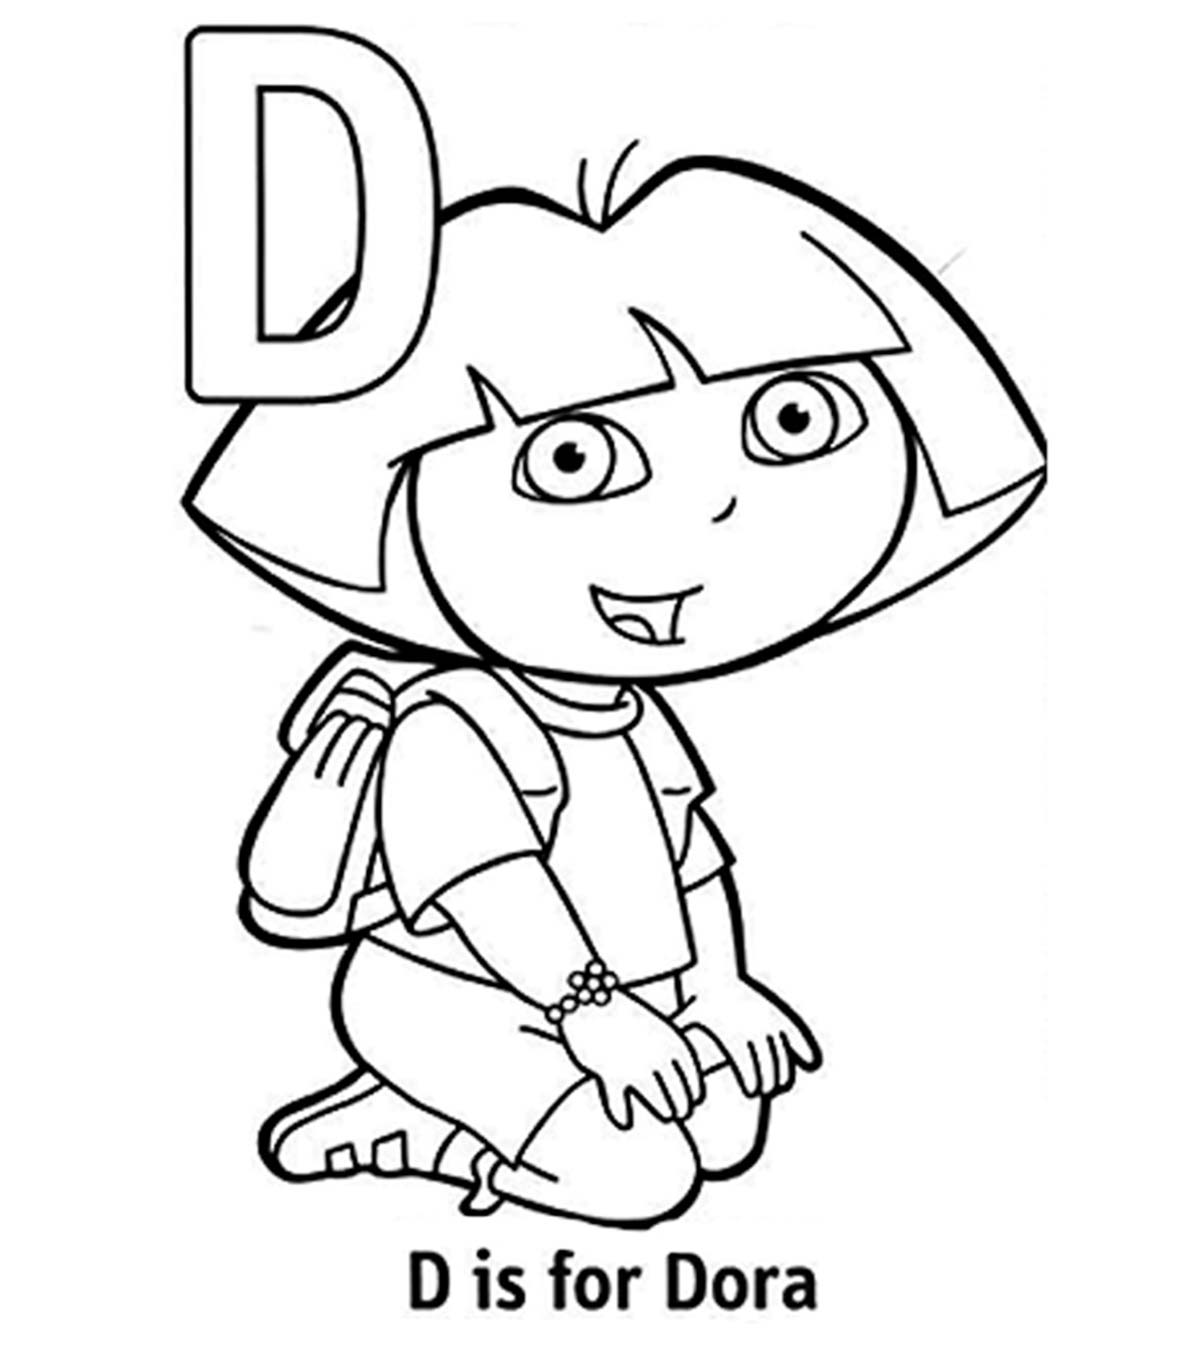 Top 10 Letter D Coloring Pages For Your Little Ones_image